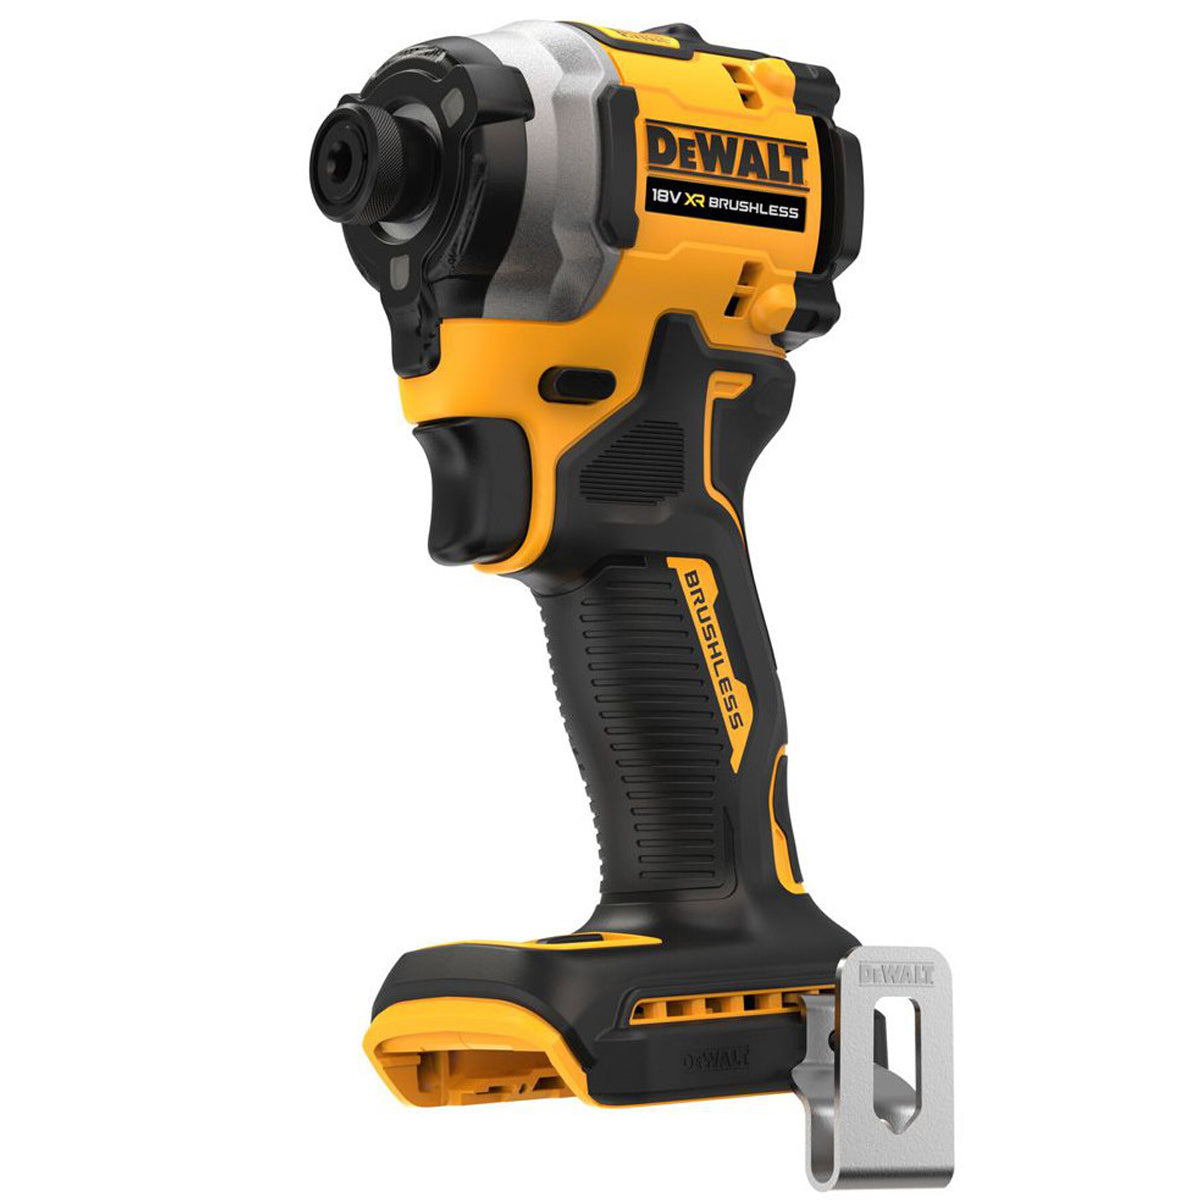 DeWalt 20V Max XR Cordless Brushless 7 in. Variable Speed Rotary Polisher with 20V 5.0Ah Lithium-Ion Battery Pack